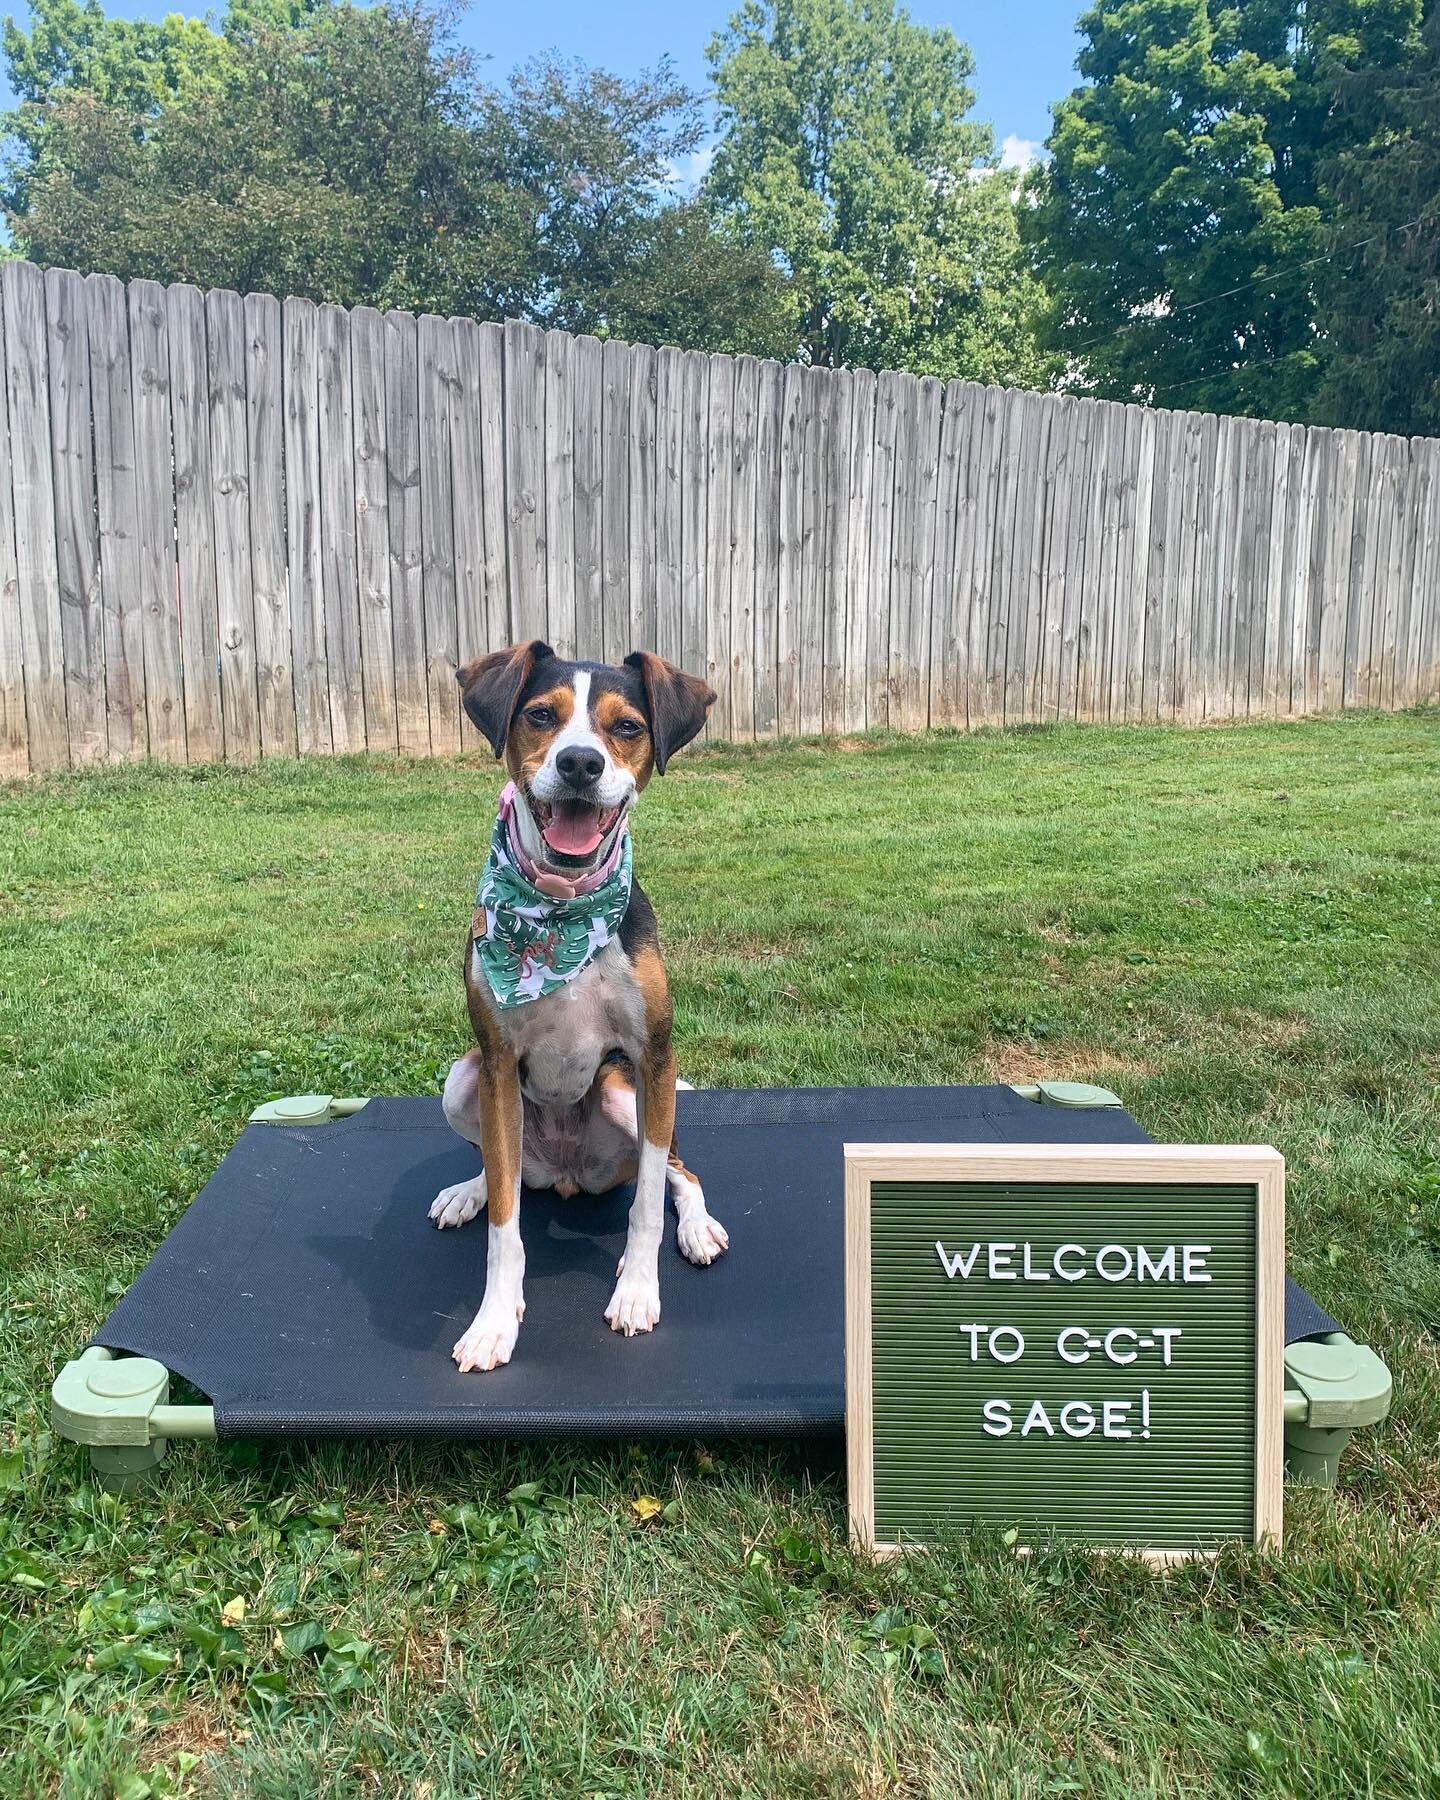 This is Sage!

Sage is joining us for 3 weeks getting some help learning some manners, obedience, loose leash walking, and to not be so reactive when out walking! Follow along to watch her progress!

I have a few more spots left for 2022, if you woul